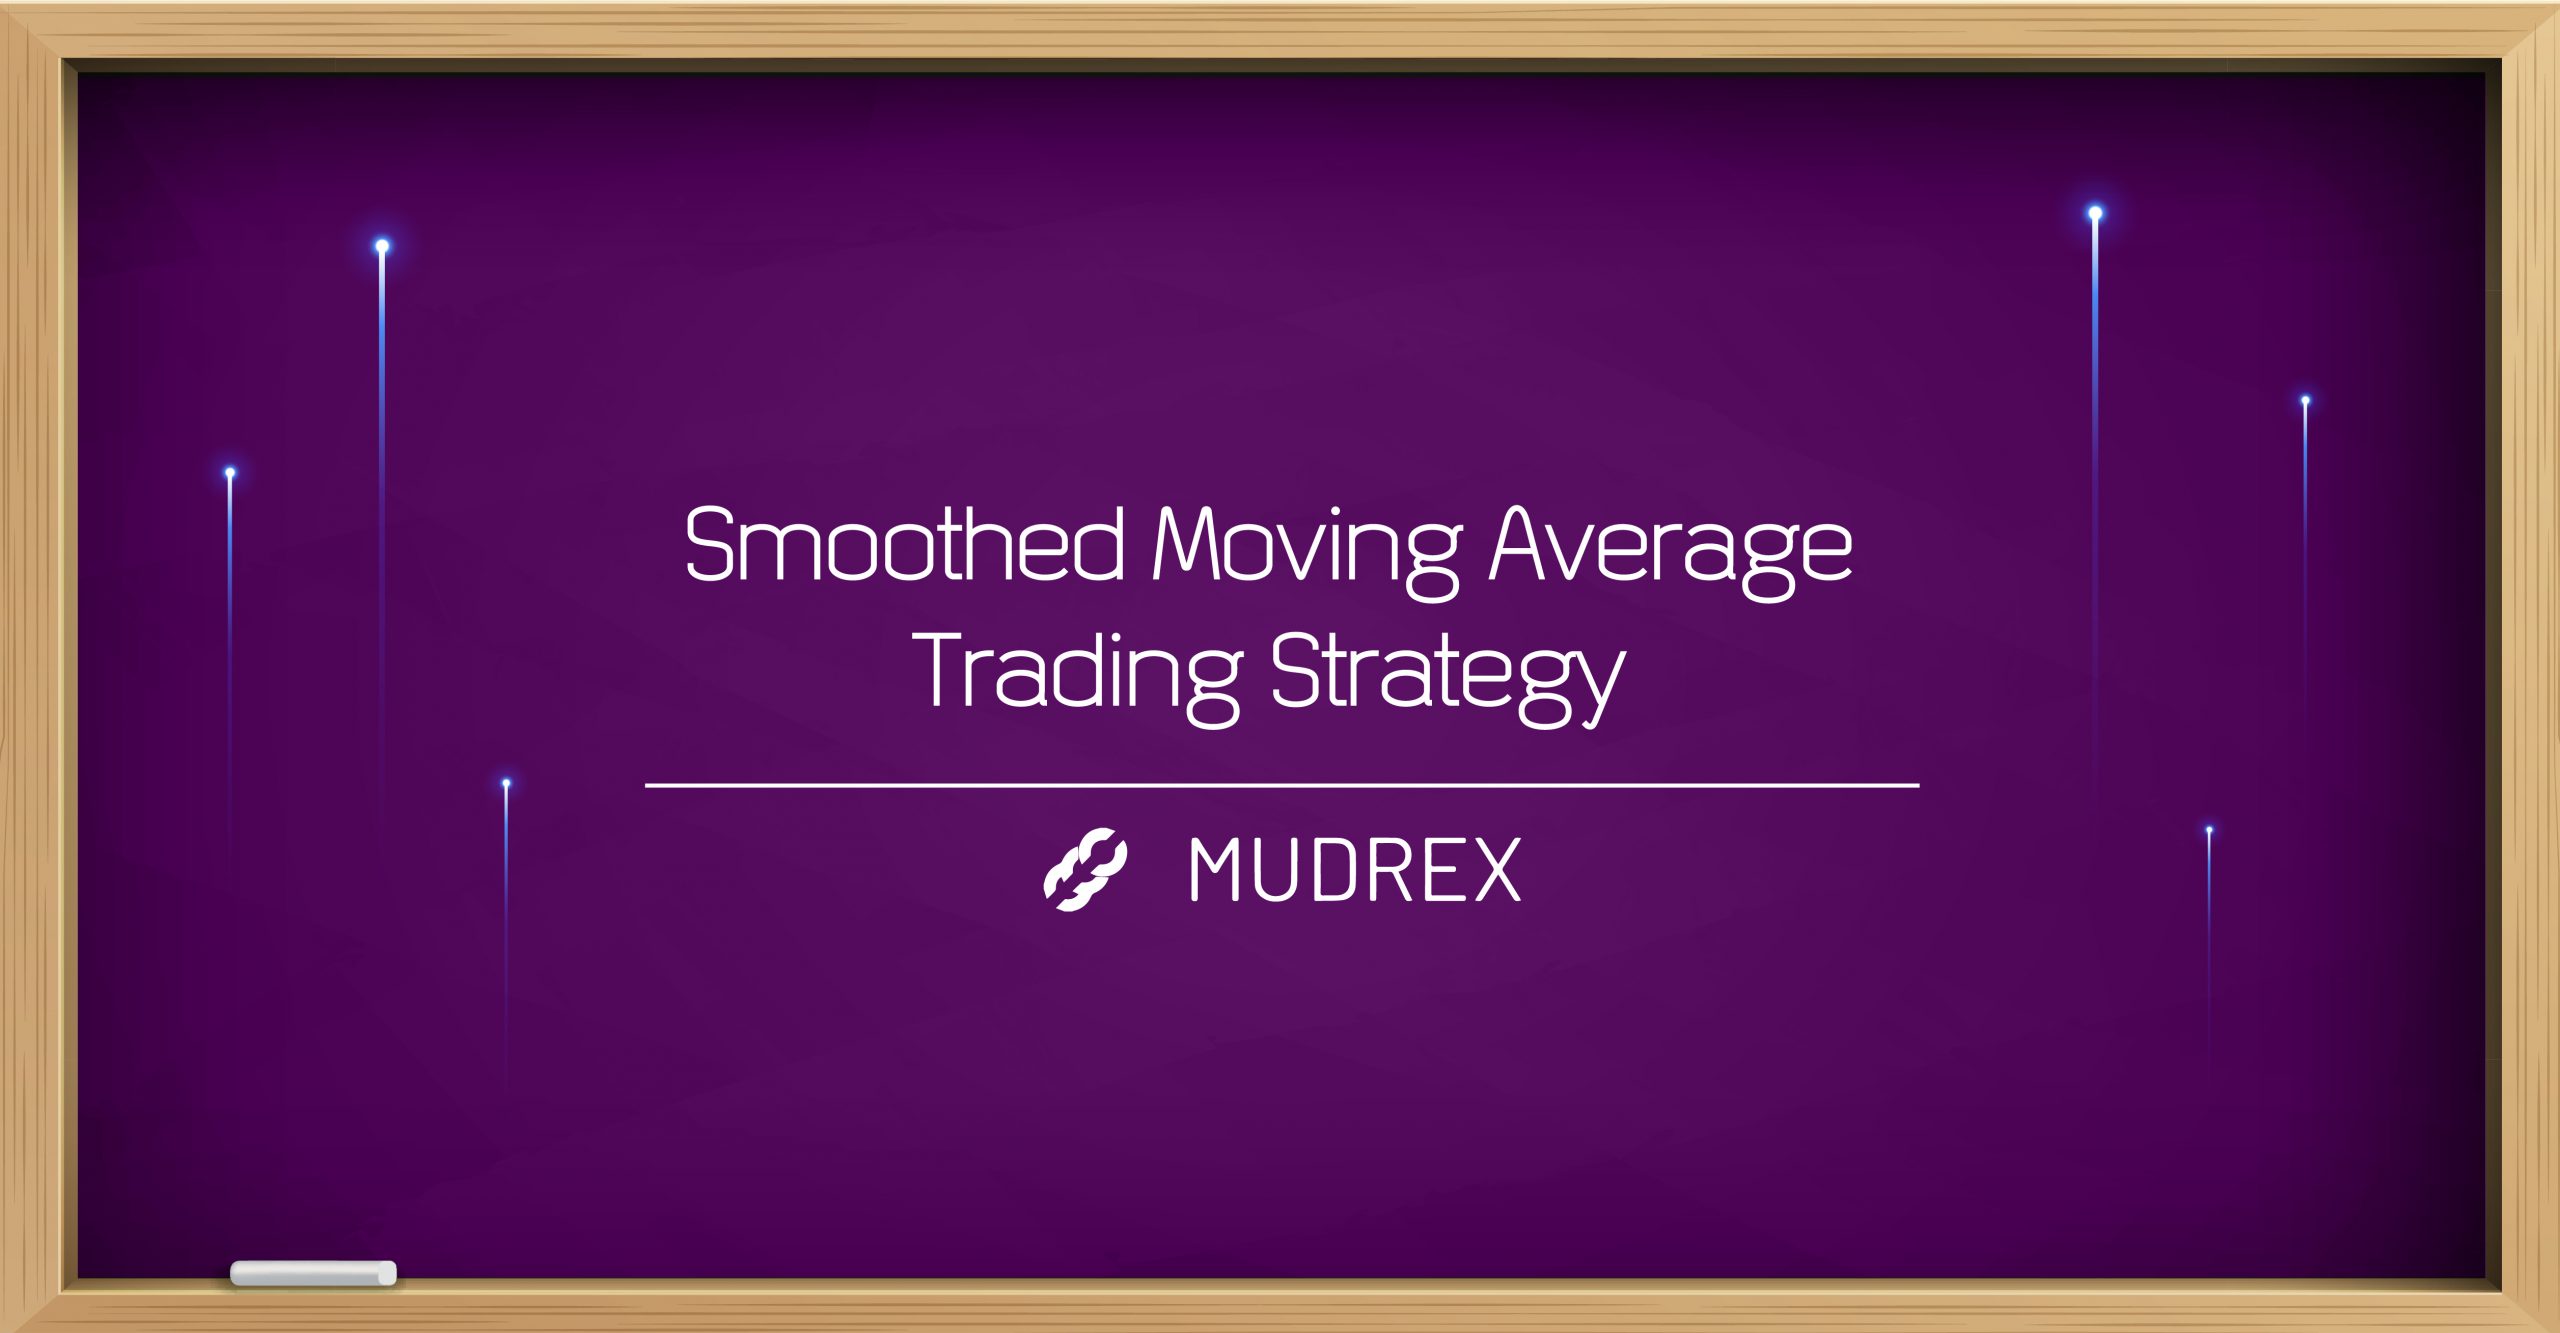 Smoothed Moving Average